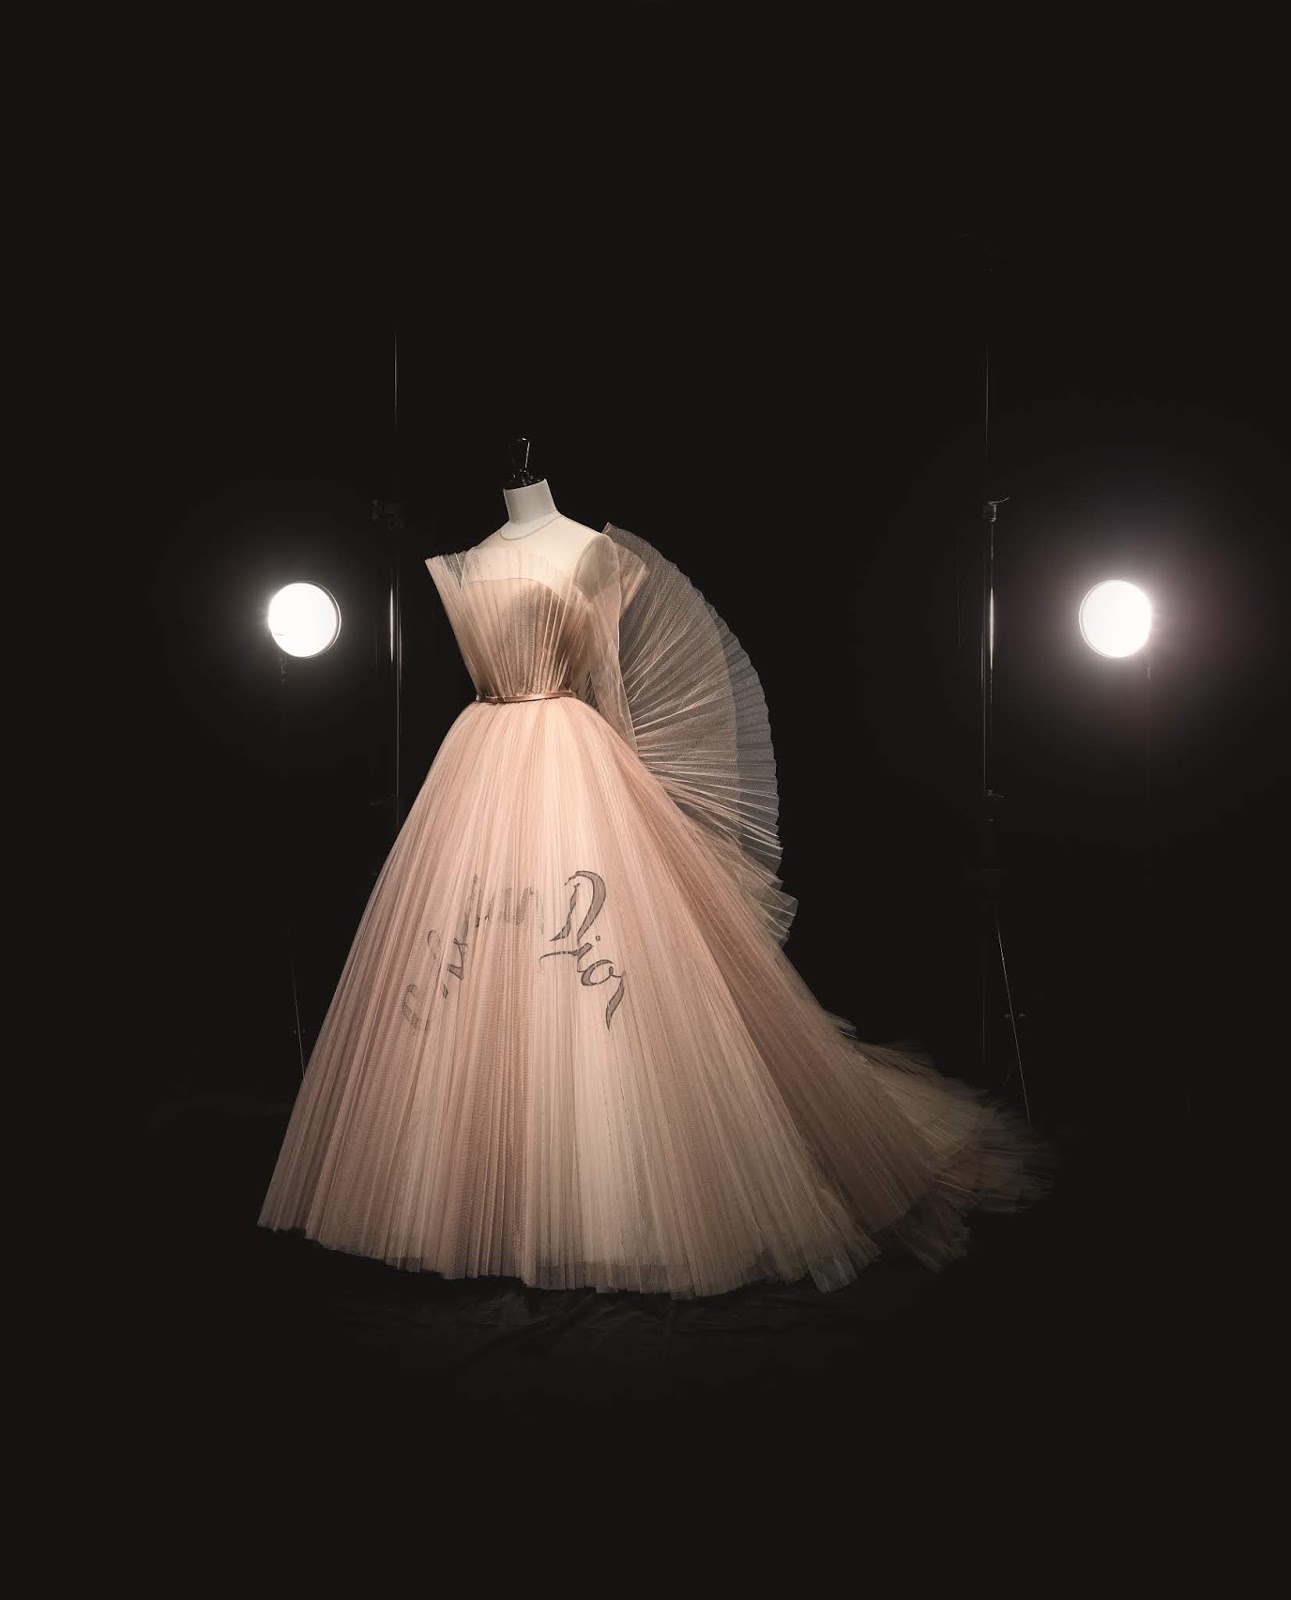 V&A exhibition explores the all-pervasive legacy of Christian Dior